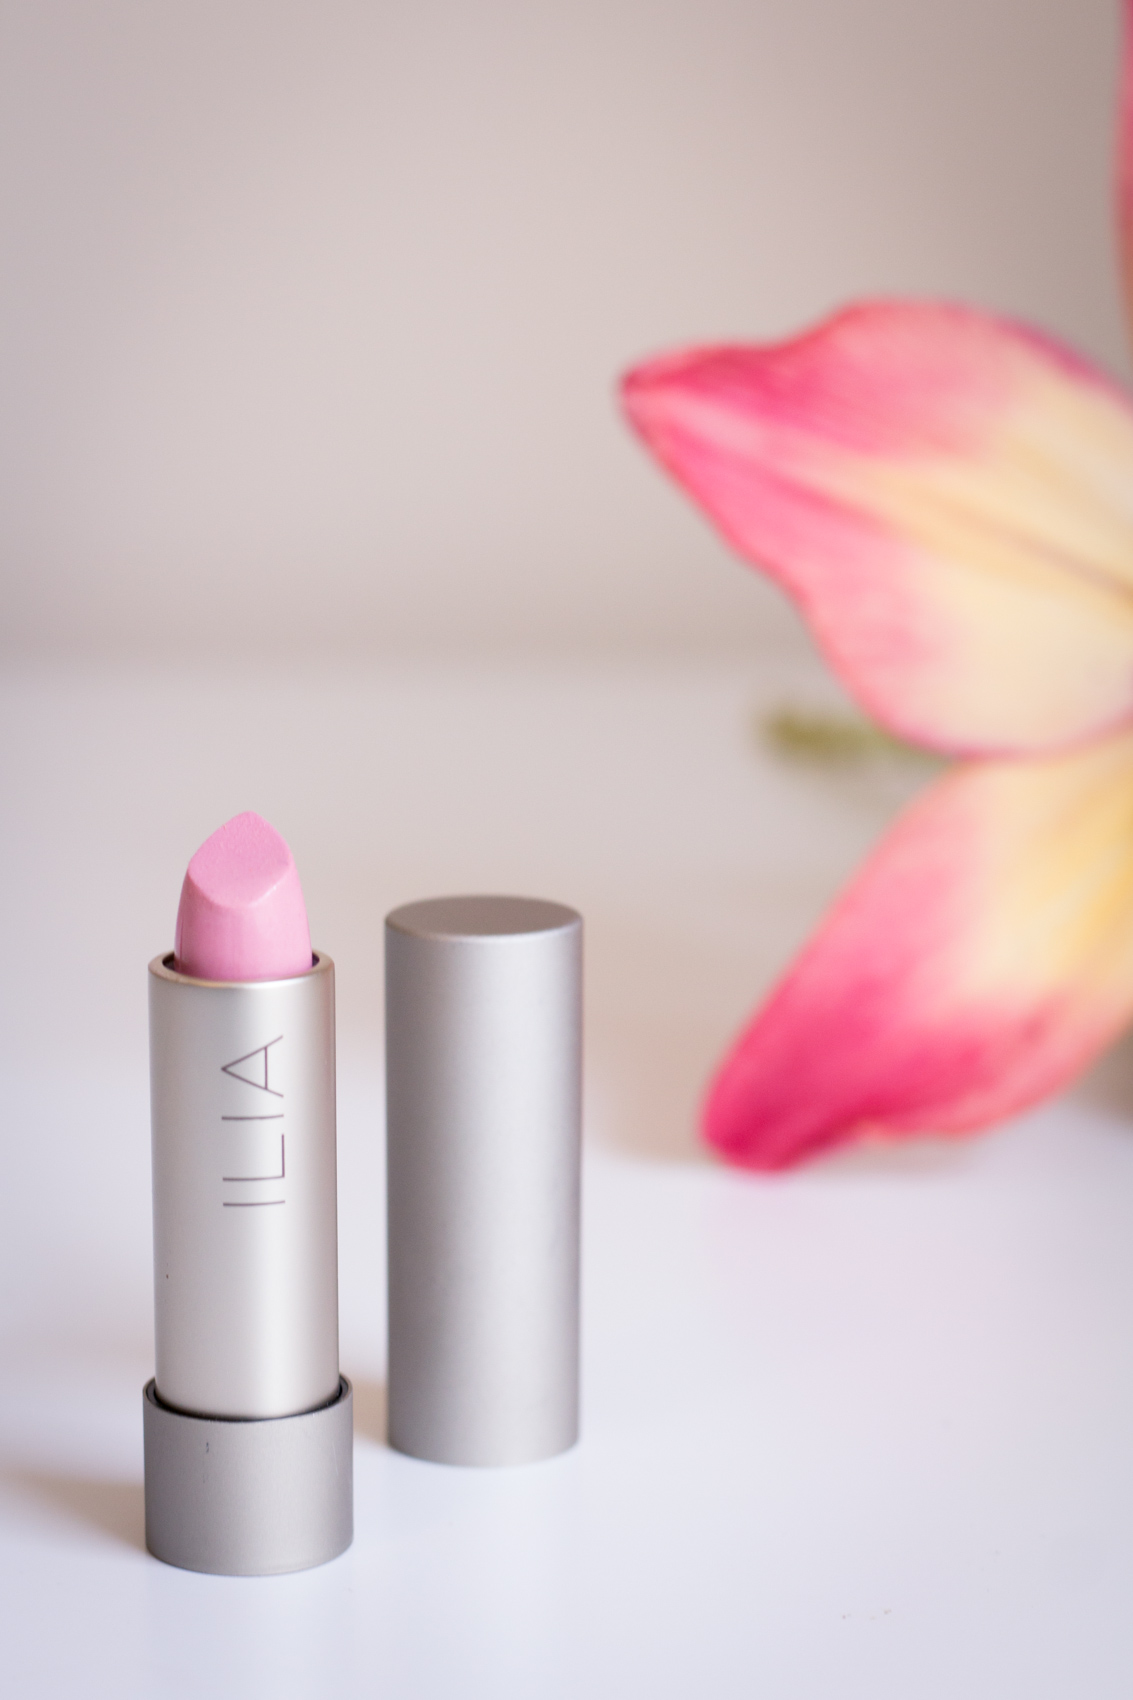 With warm weather comes less, well, everything: clothes, stress, work, makeup, etc. Today's post and video focuses on getting that perfect neutral pale pink lip. For me, it's a difficult balance to find because of my pale skin, so I thought I would share this tutorial to help those of you in a similar situation!